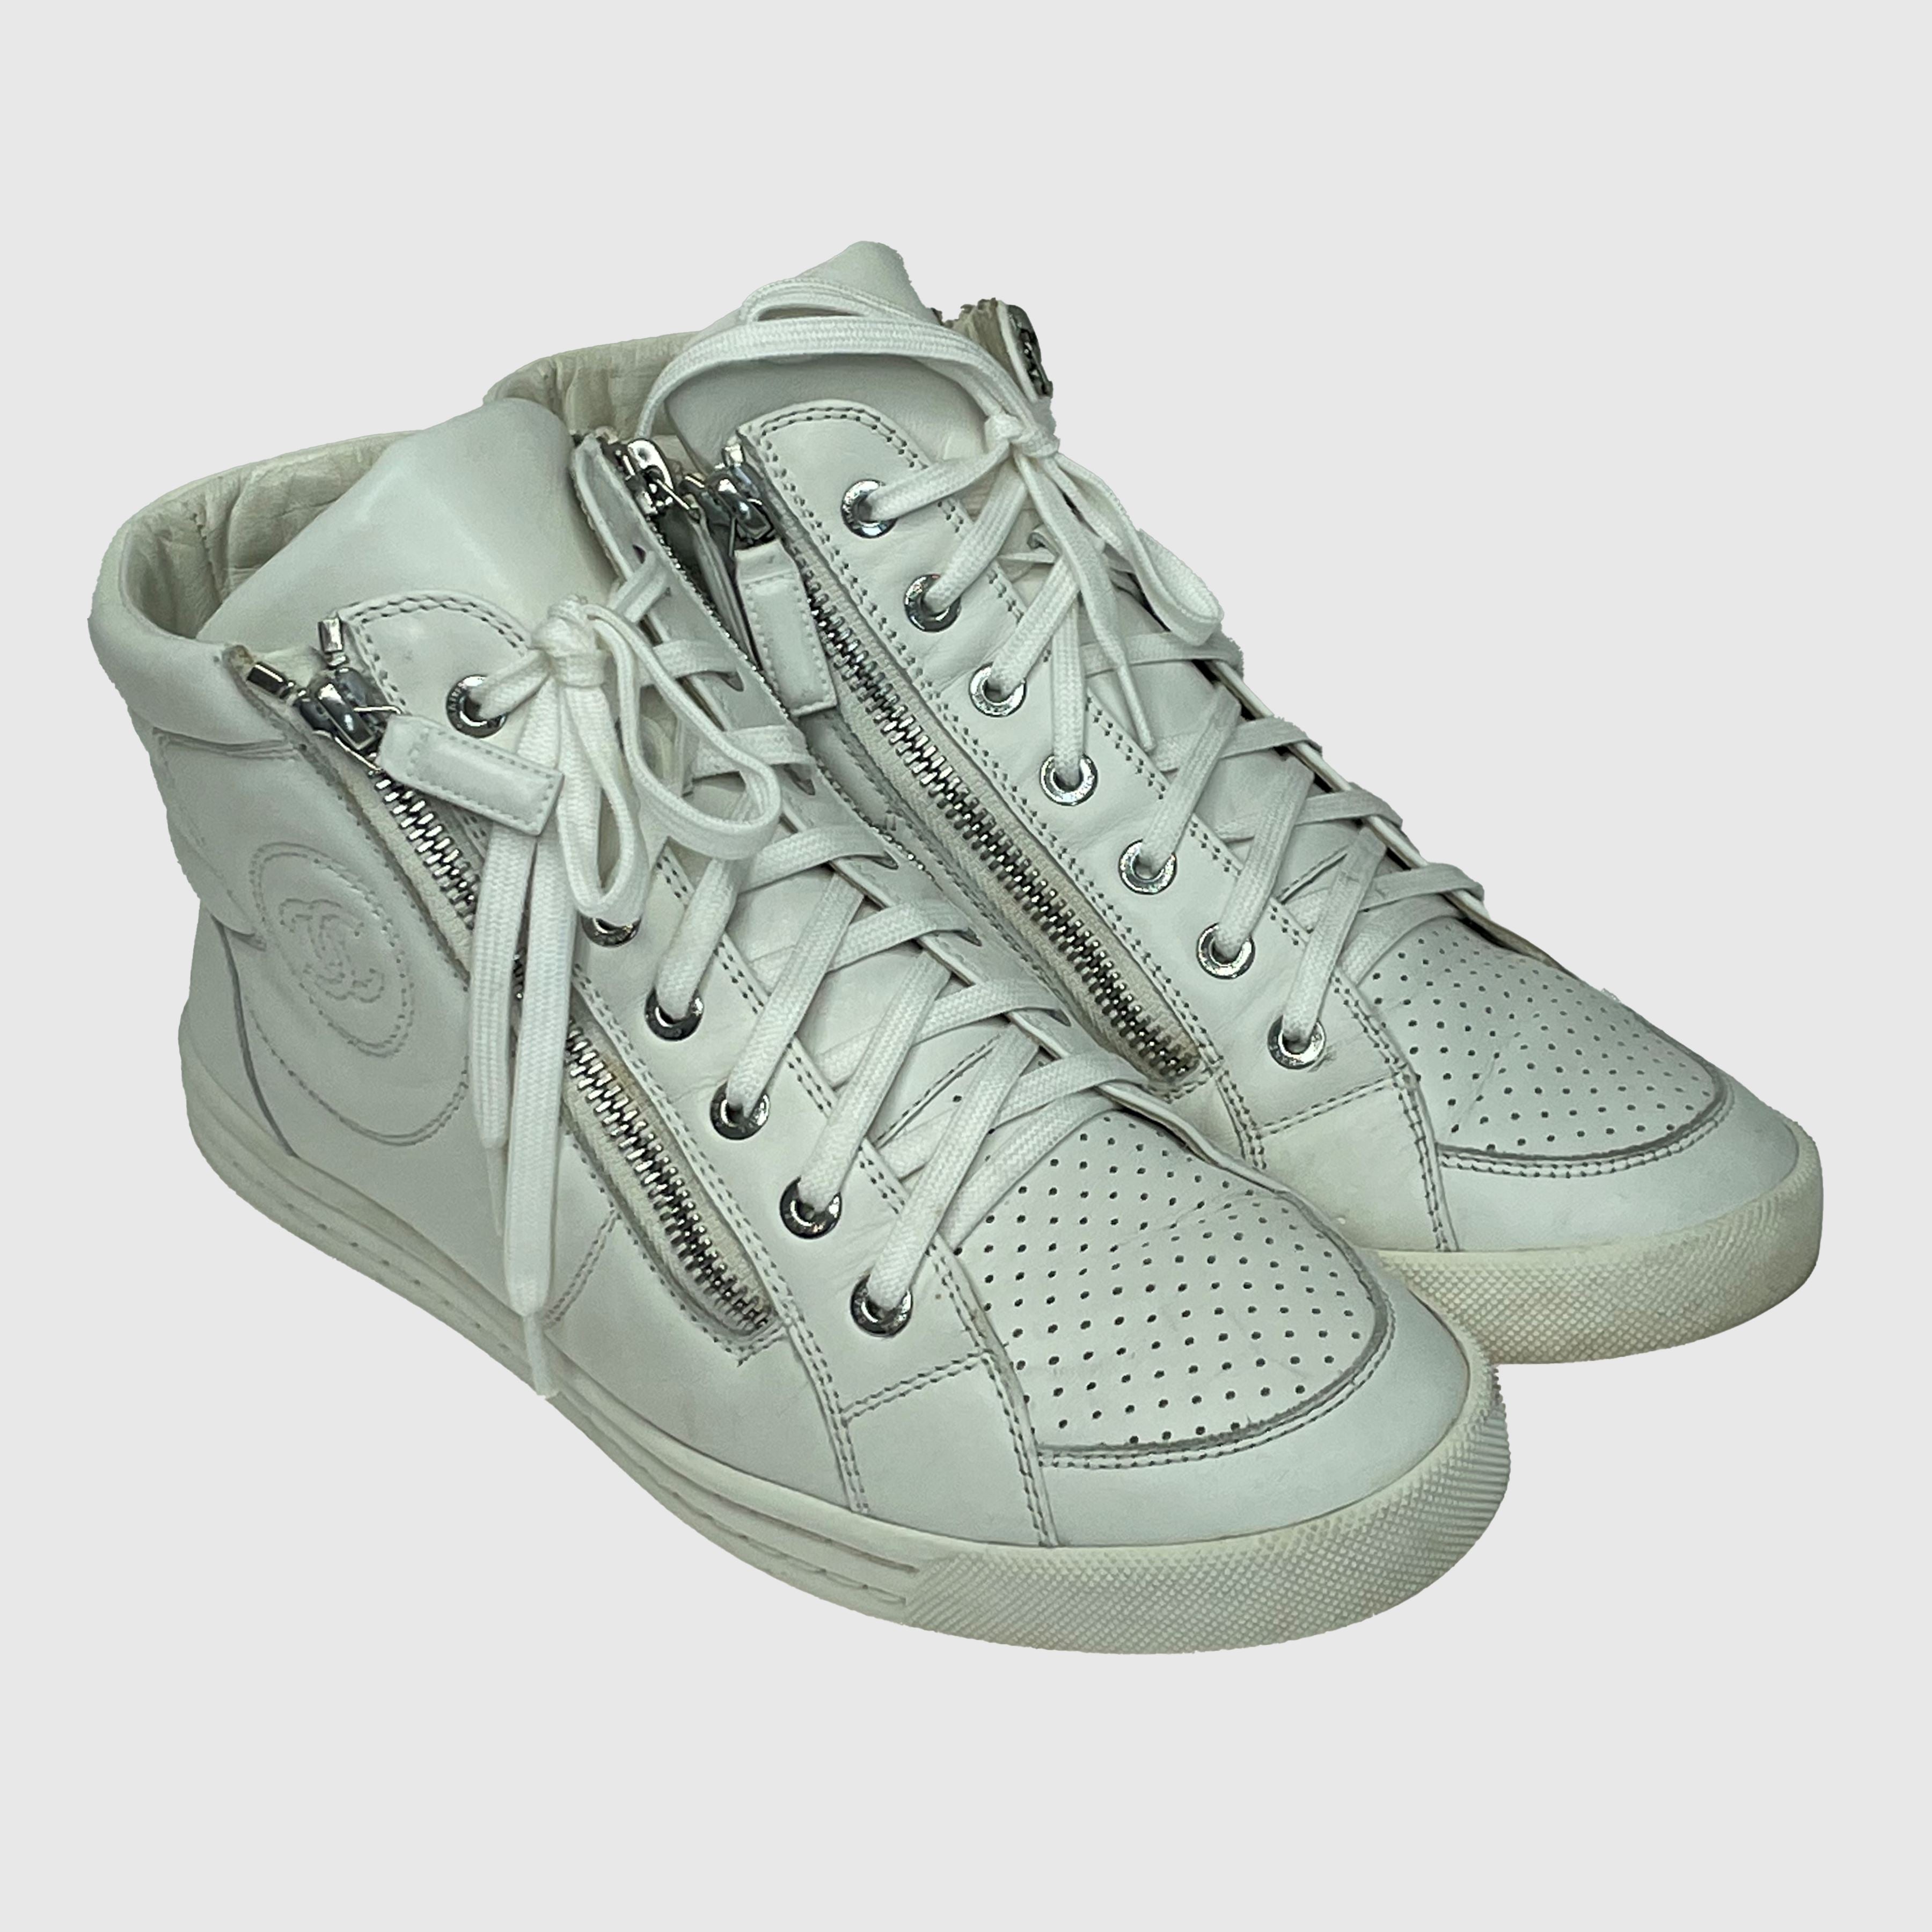 White Leather CC High Top Sneakers Shoes Chanel 